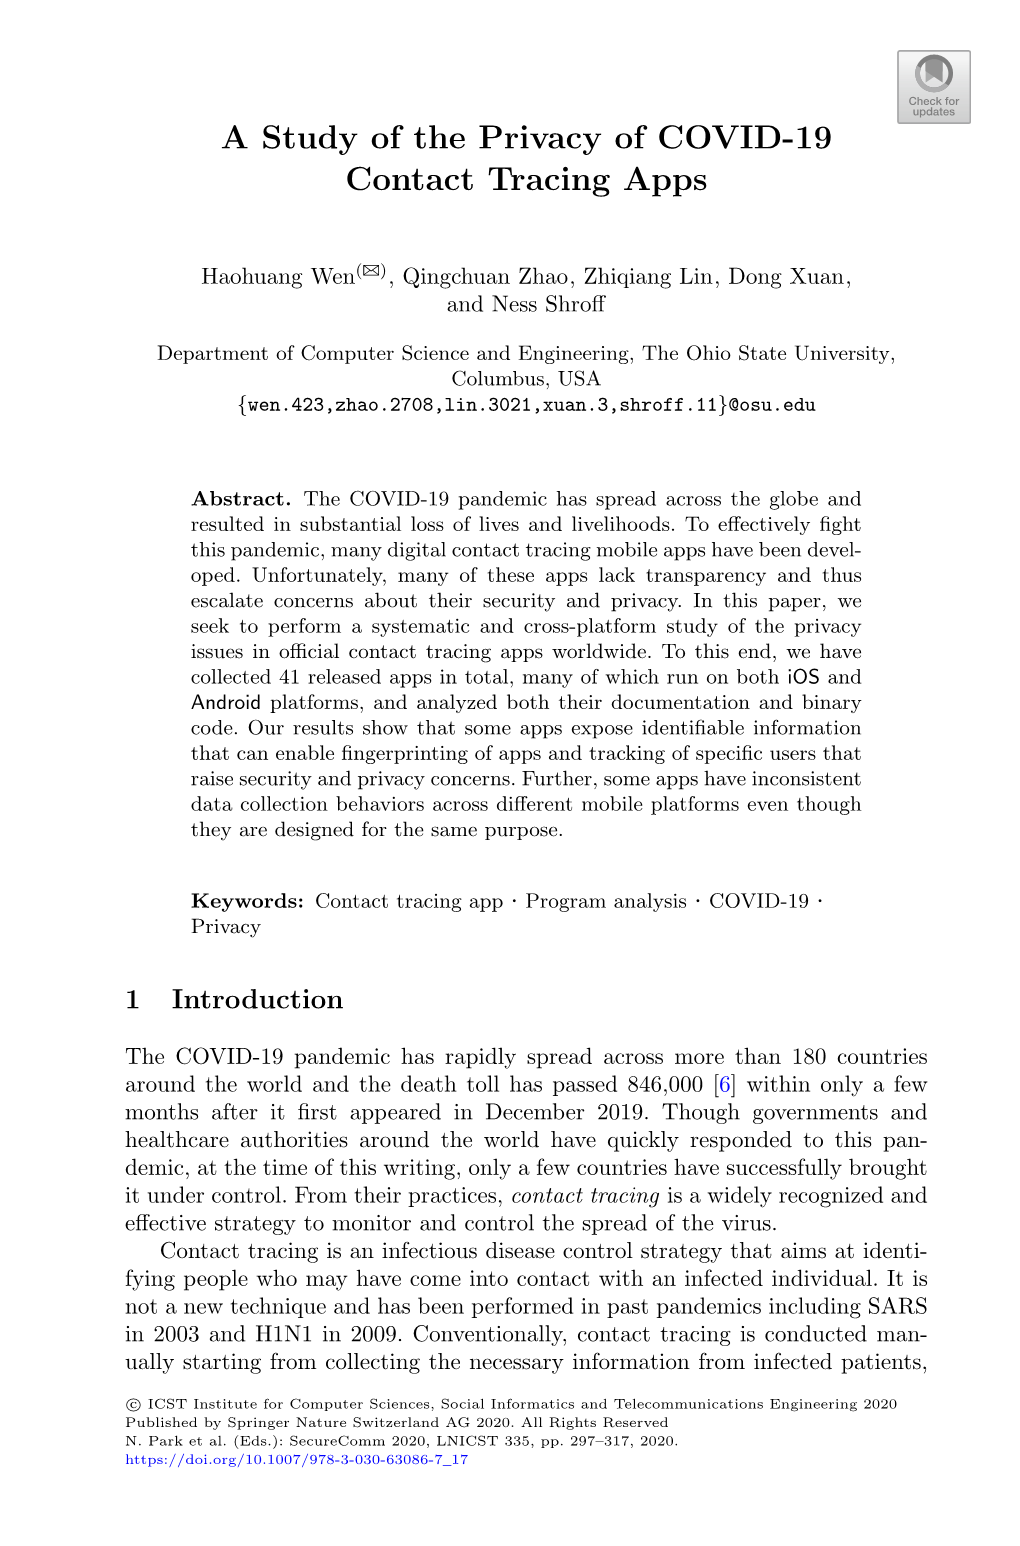 A Study of the Privacy of COVID-19 Contact Tracing Apps